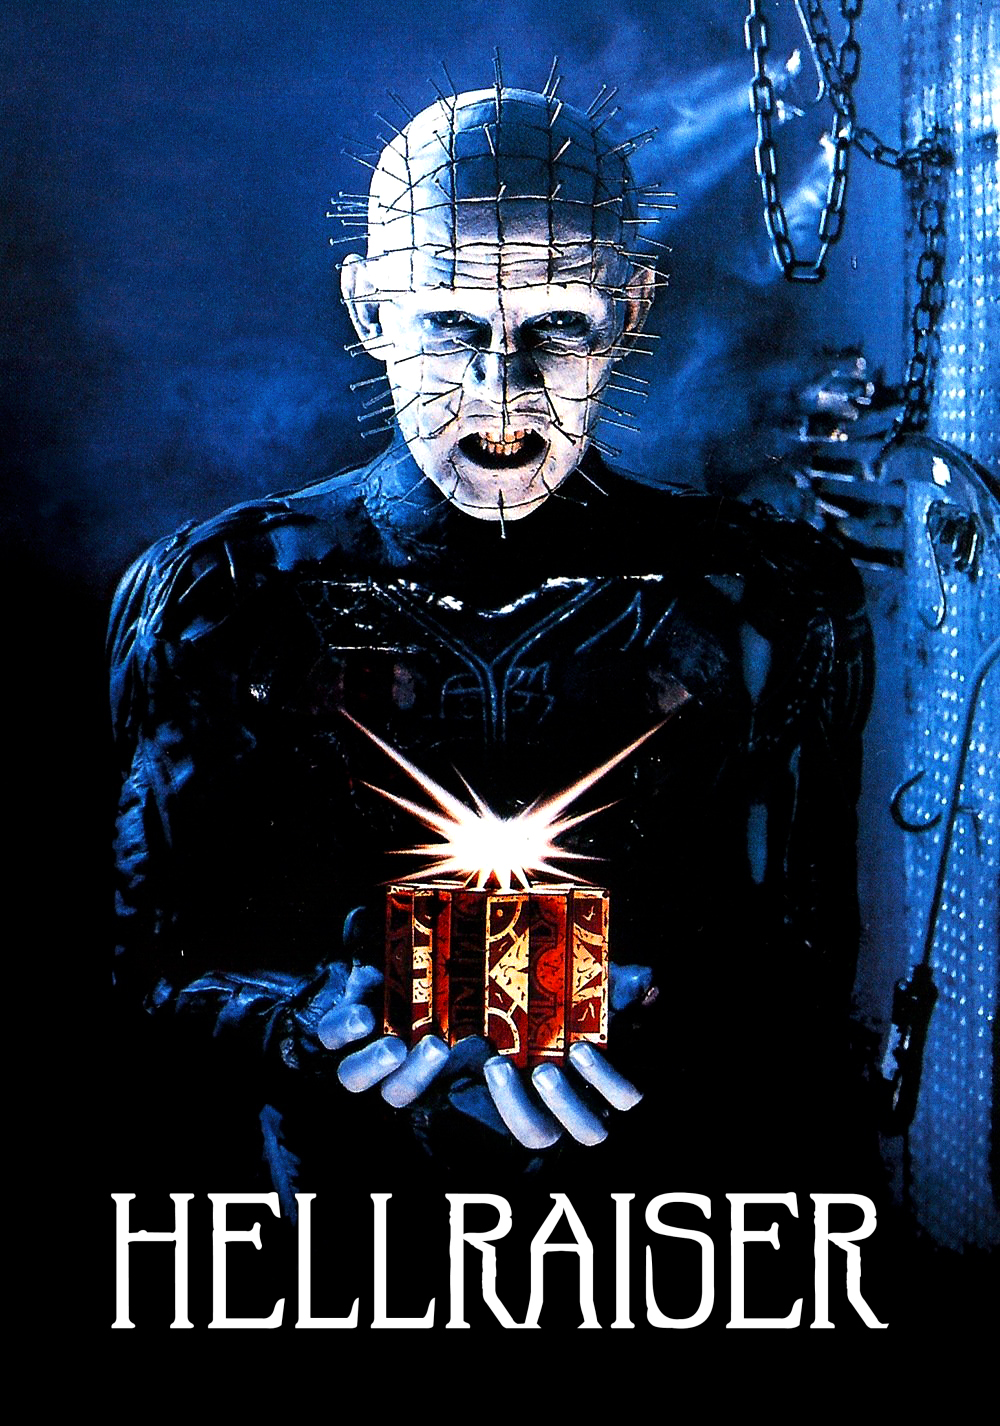 The Best Quotes From The Movie 'Hellraiser'